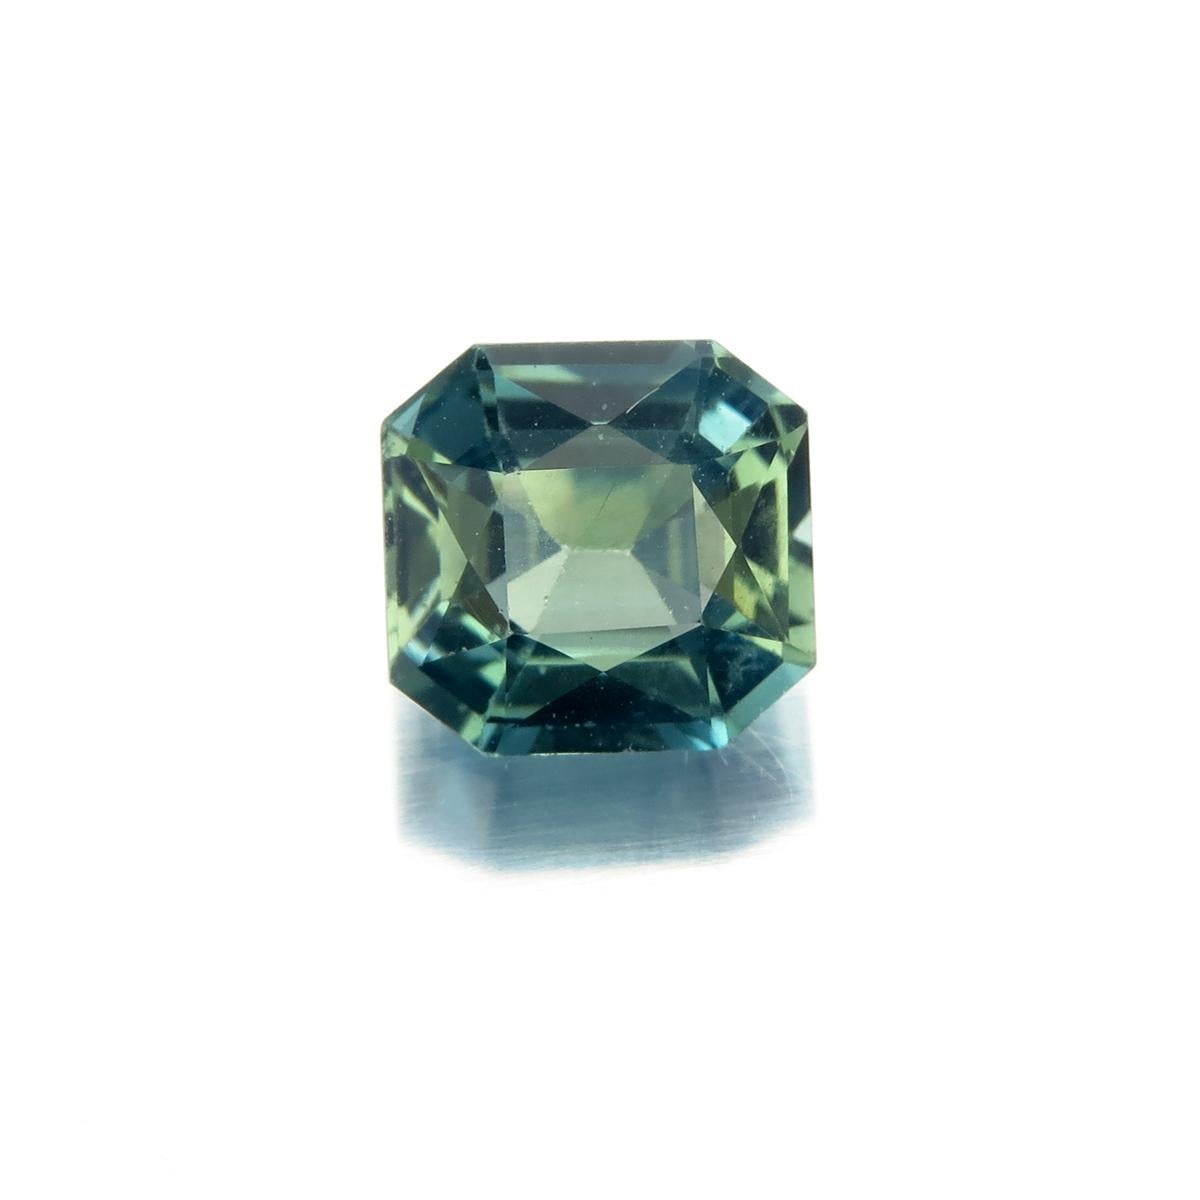 Sparkling 1.32 carat Bluish Green Sapphire 
Dimensions: 6.41 x 6.17 x 3.50 mm
Cut: Octagonal Faceted
No Heat
Lotus certified